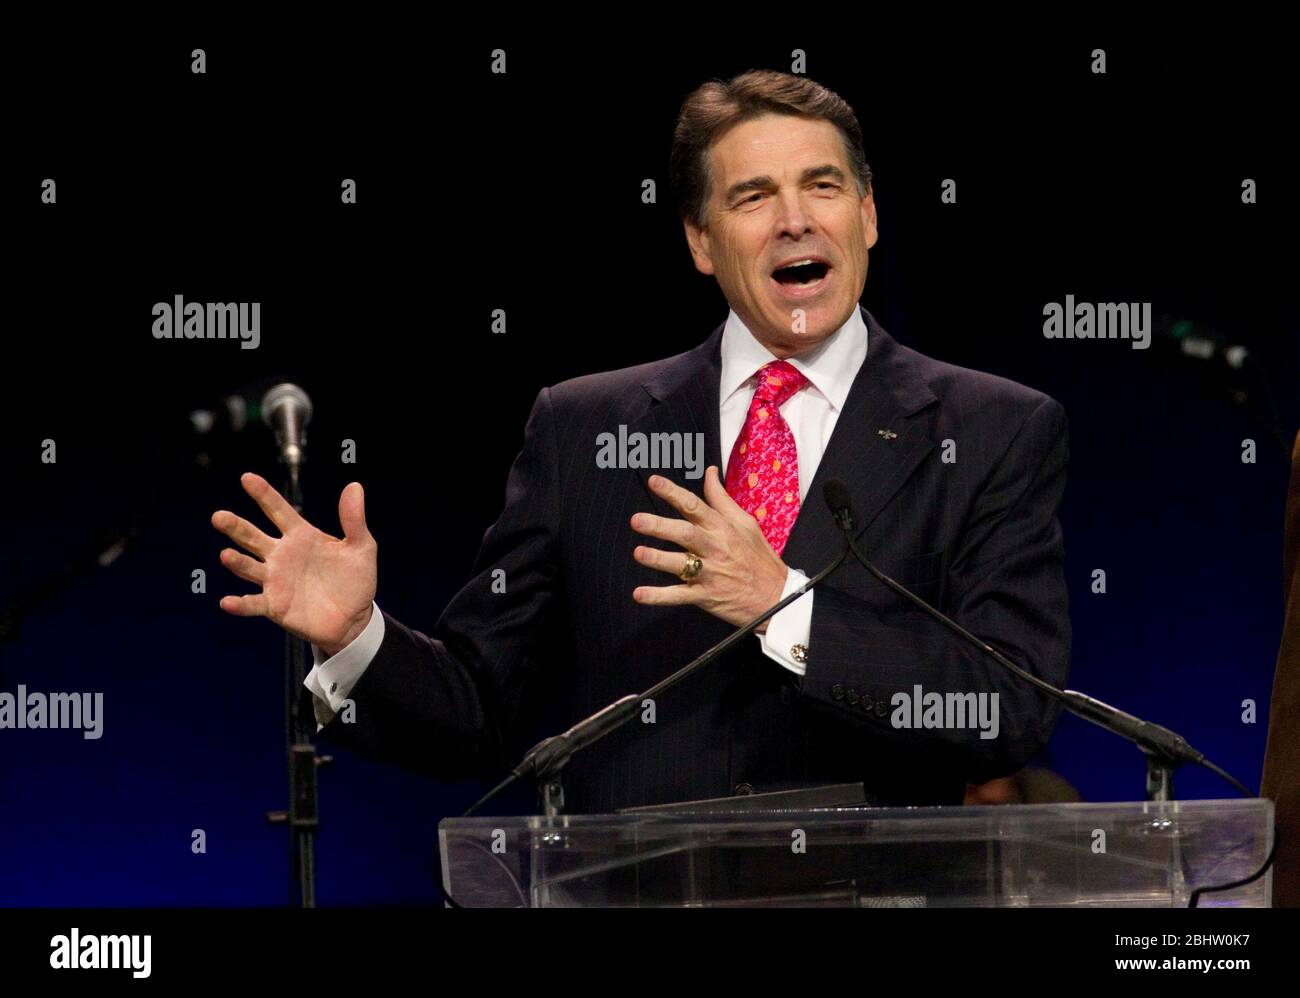 Houston, Texas USA, August 6, 2011: Texas Governor Rick Perry speaks at The Response, a day-long 'call to prayer for a nation in crisis' that attracted over 30,000 worshippers to hear prayers, gospel music and conservative evangelic speakers at Reliant Stadium. Demonstrators outside the arena protested Perry's mixing government and religion by appearing prominently at a Christian prayer event. ©Bob Daemmrich Stock Photo